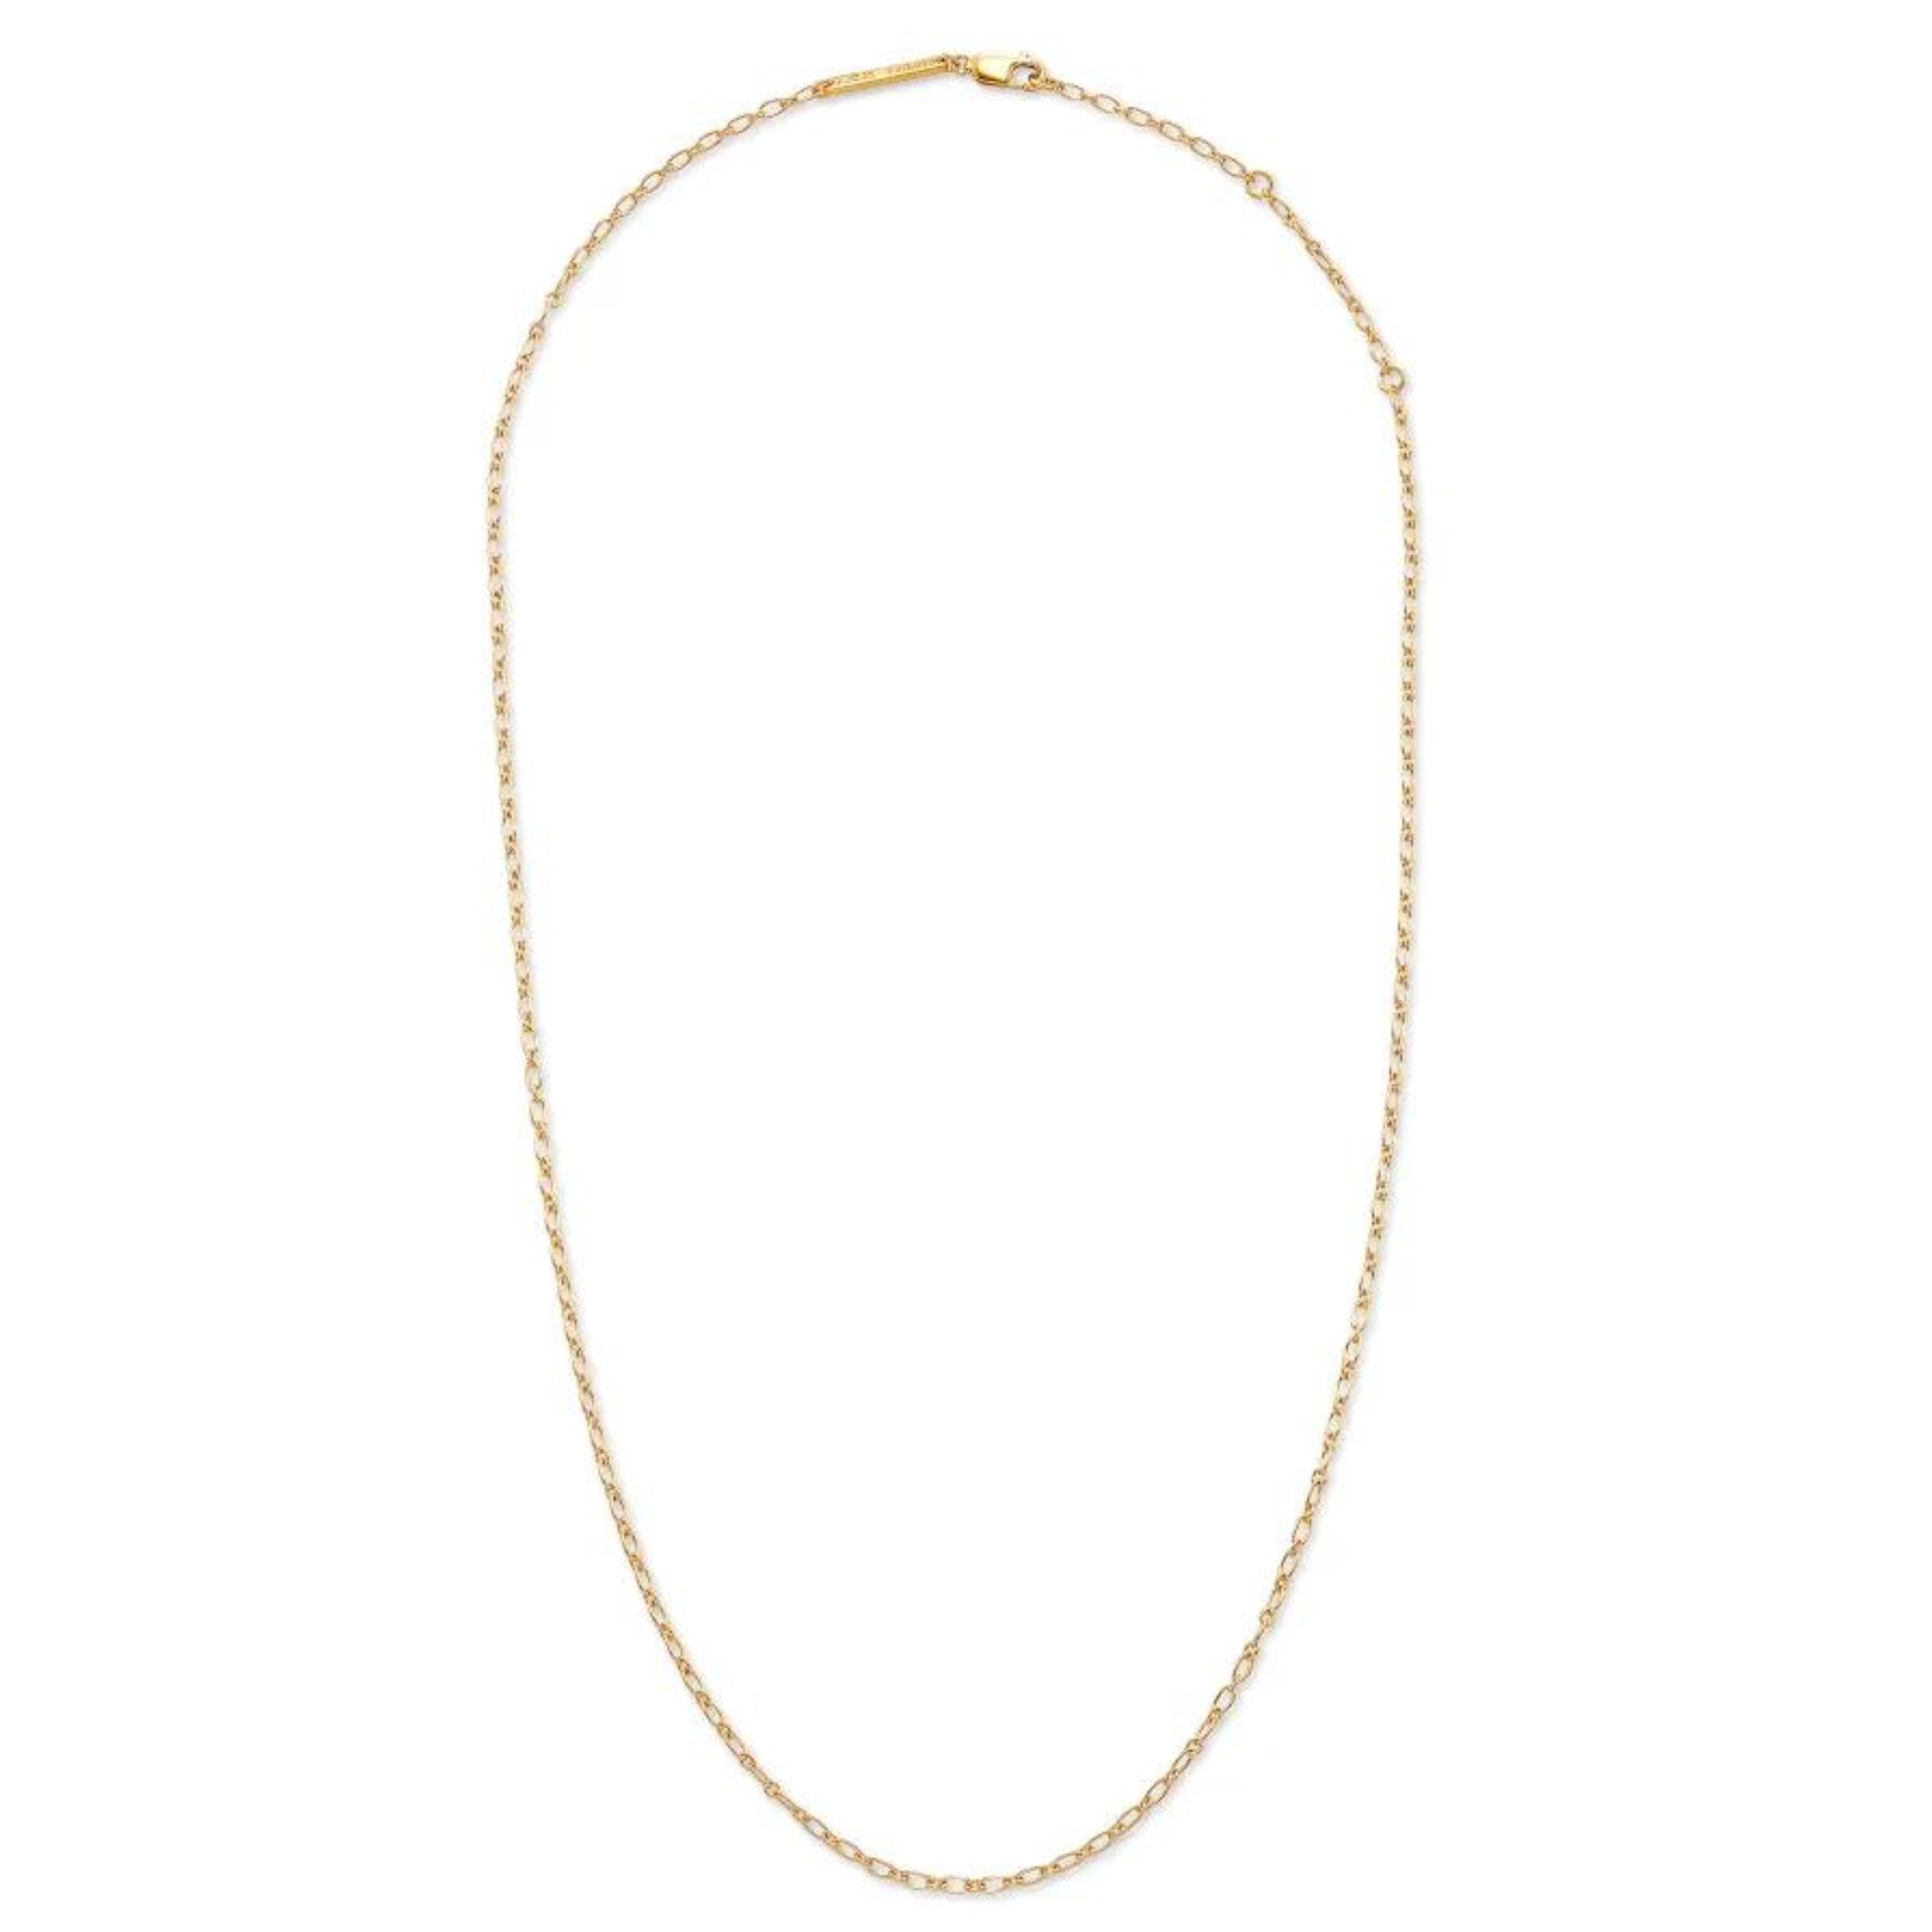 Kendra Scott | 18" Double Link Rolo Chain Necklace in 18k Gold Vermeil - Giddy Up Glamour Boutique